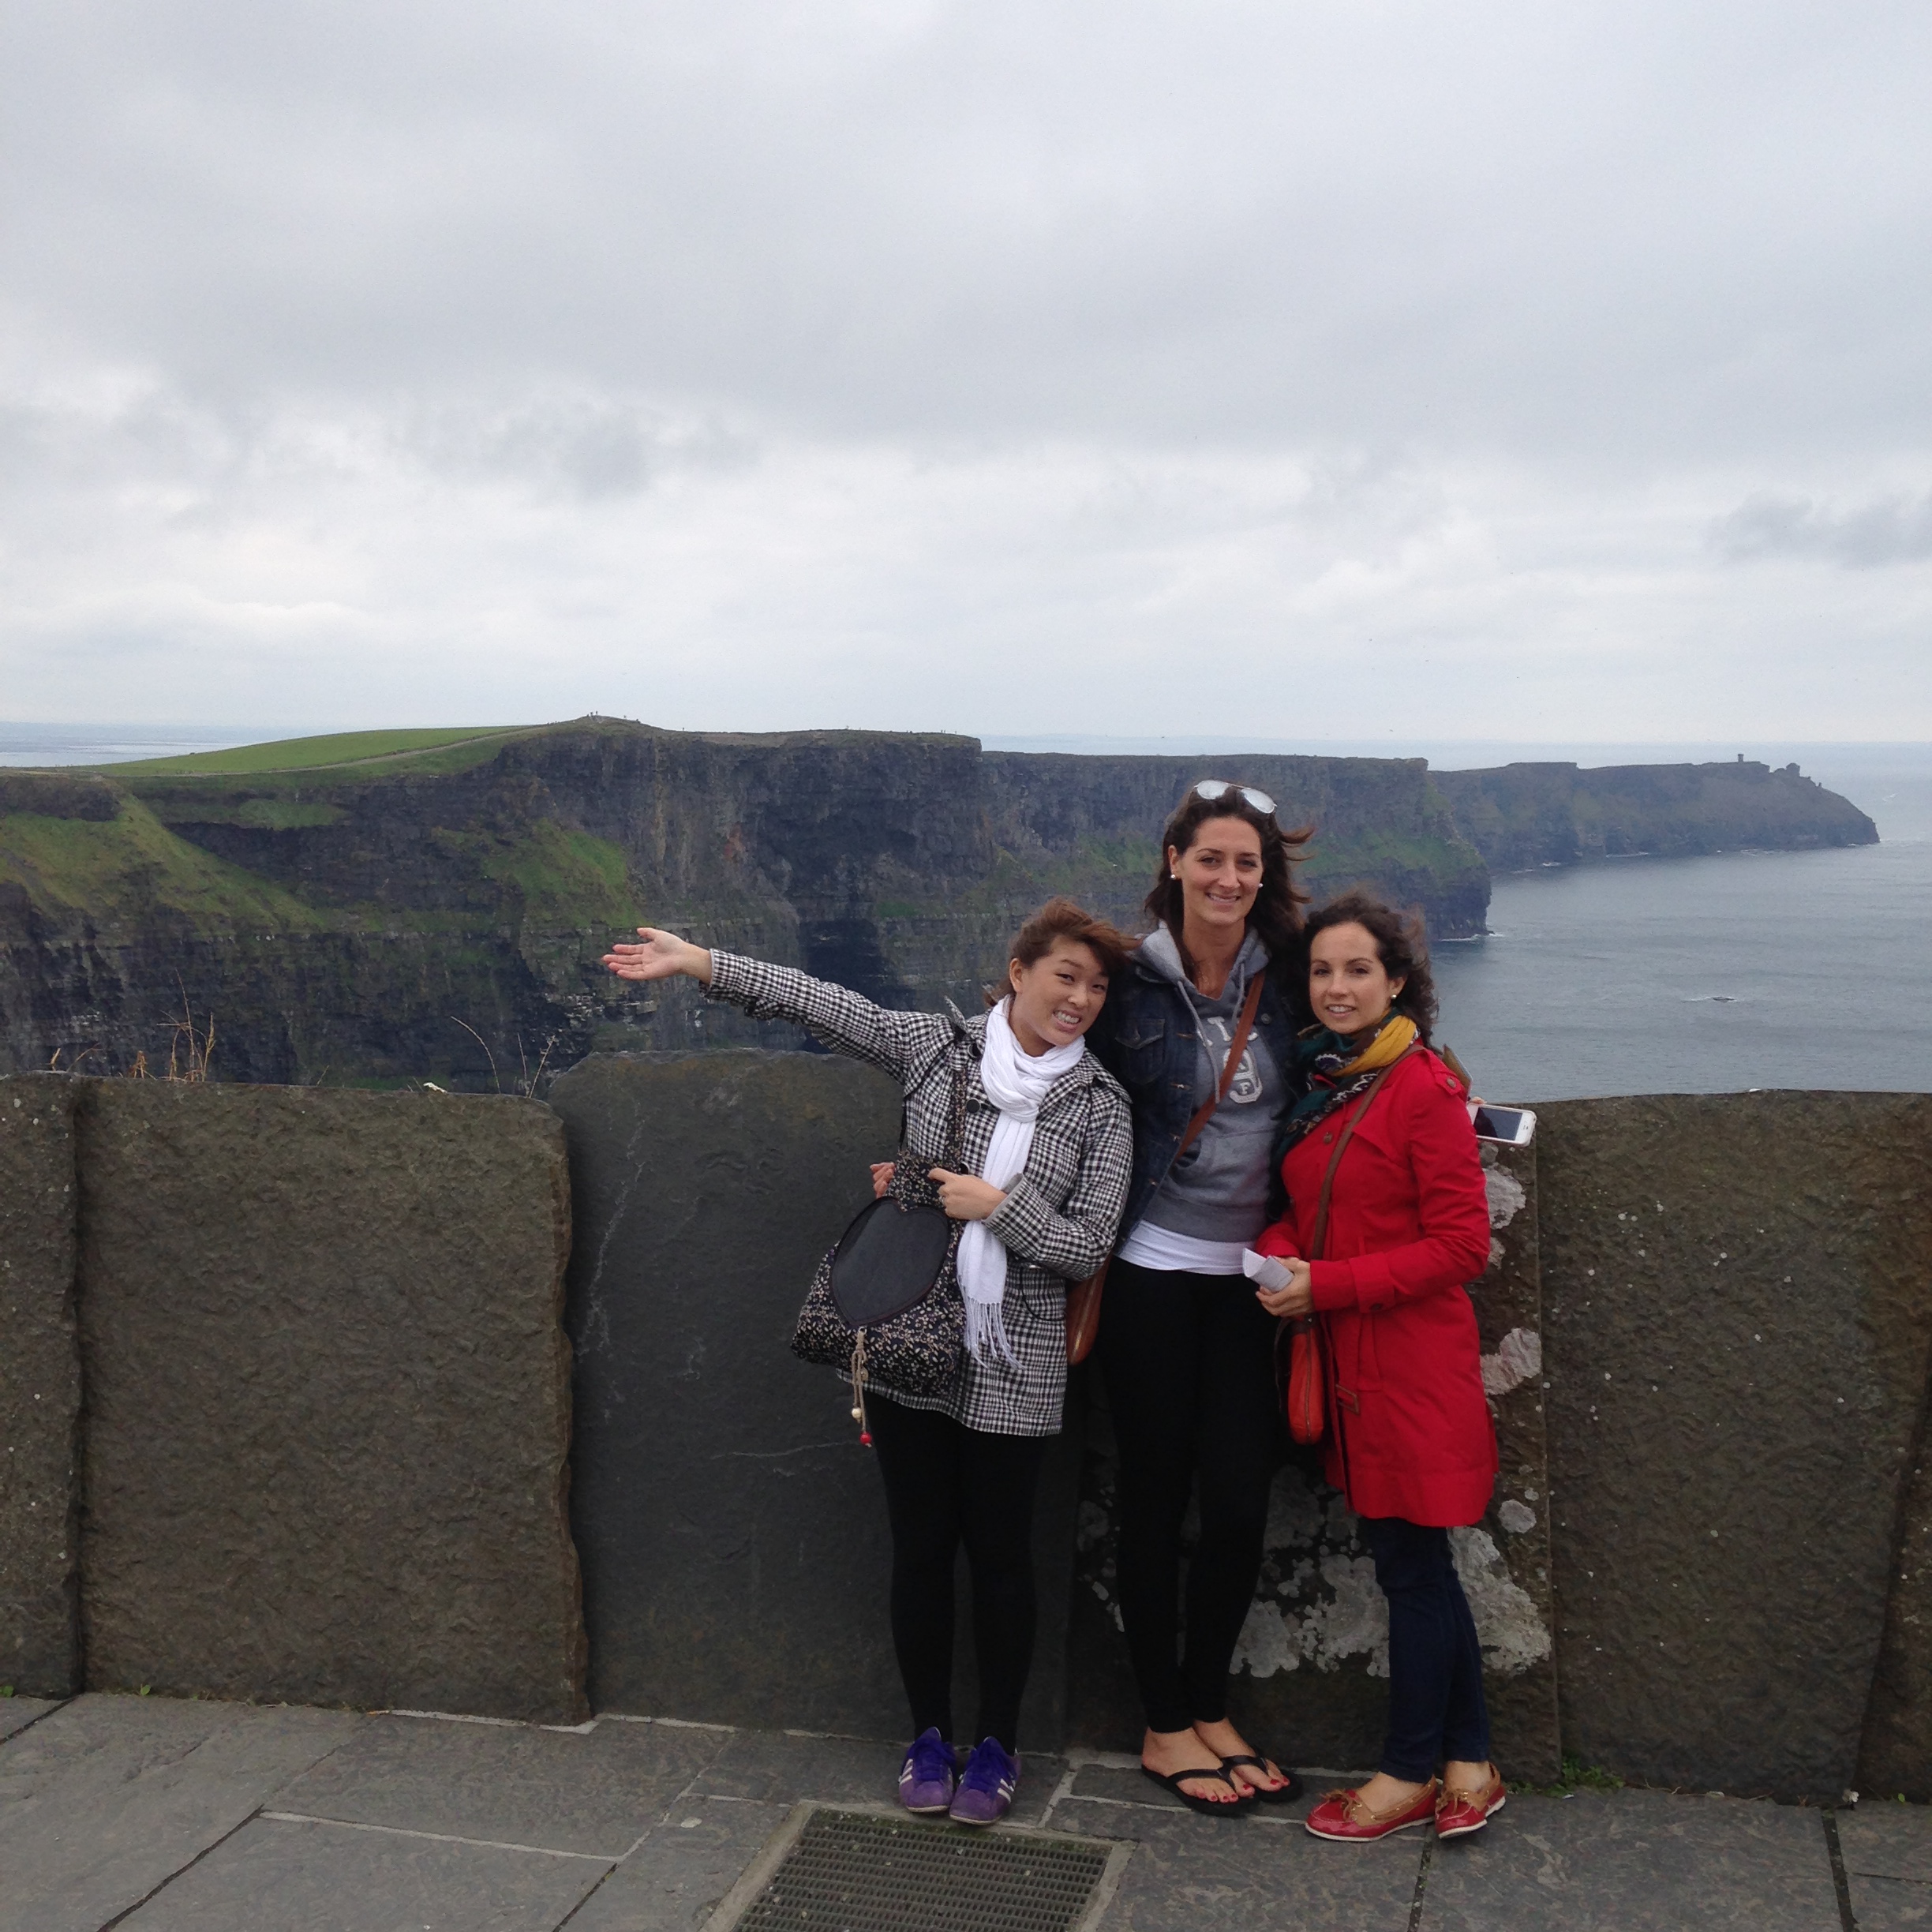 Students at the Cliffs of Moher